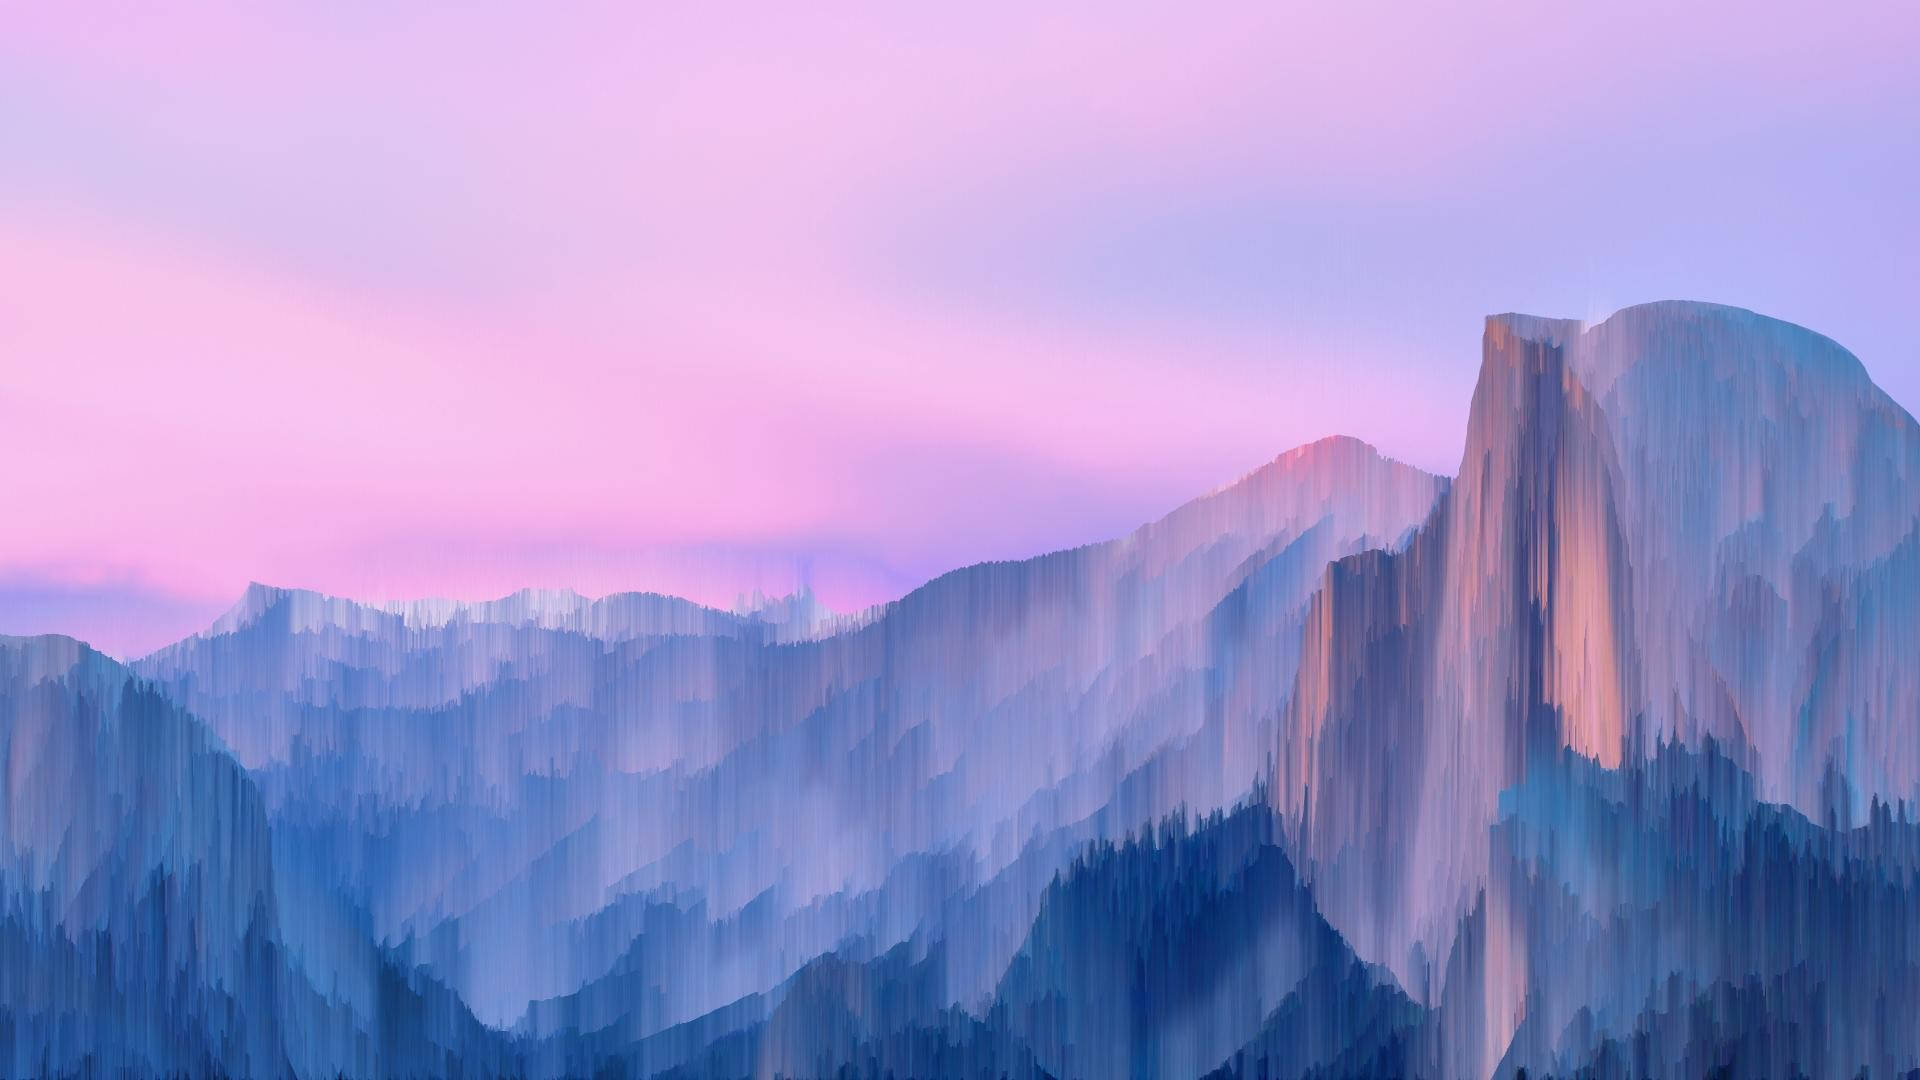 A Mountain Range With A Pink Sky And Purple Clouds Wallpaper